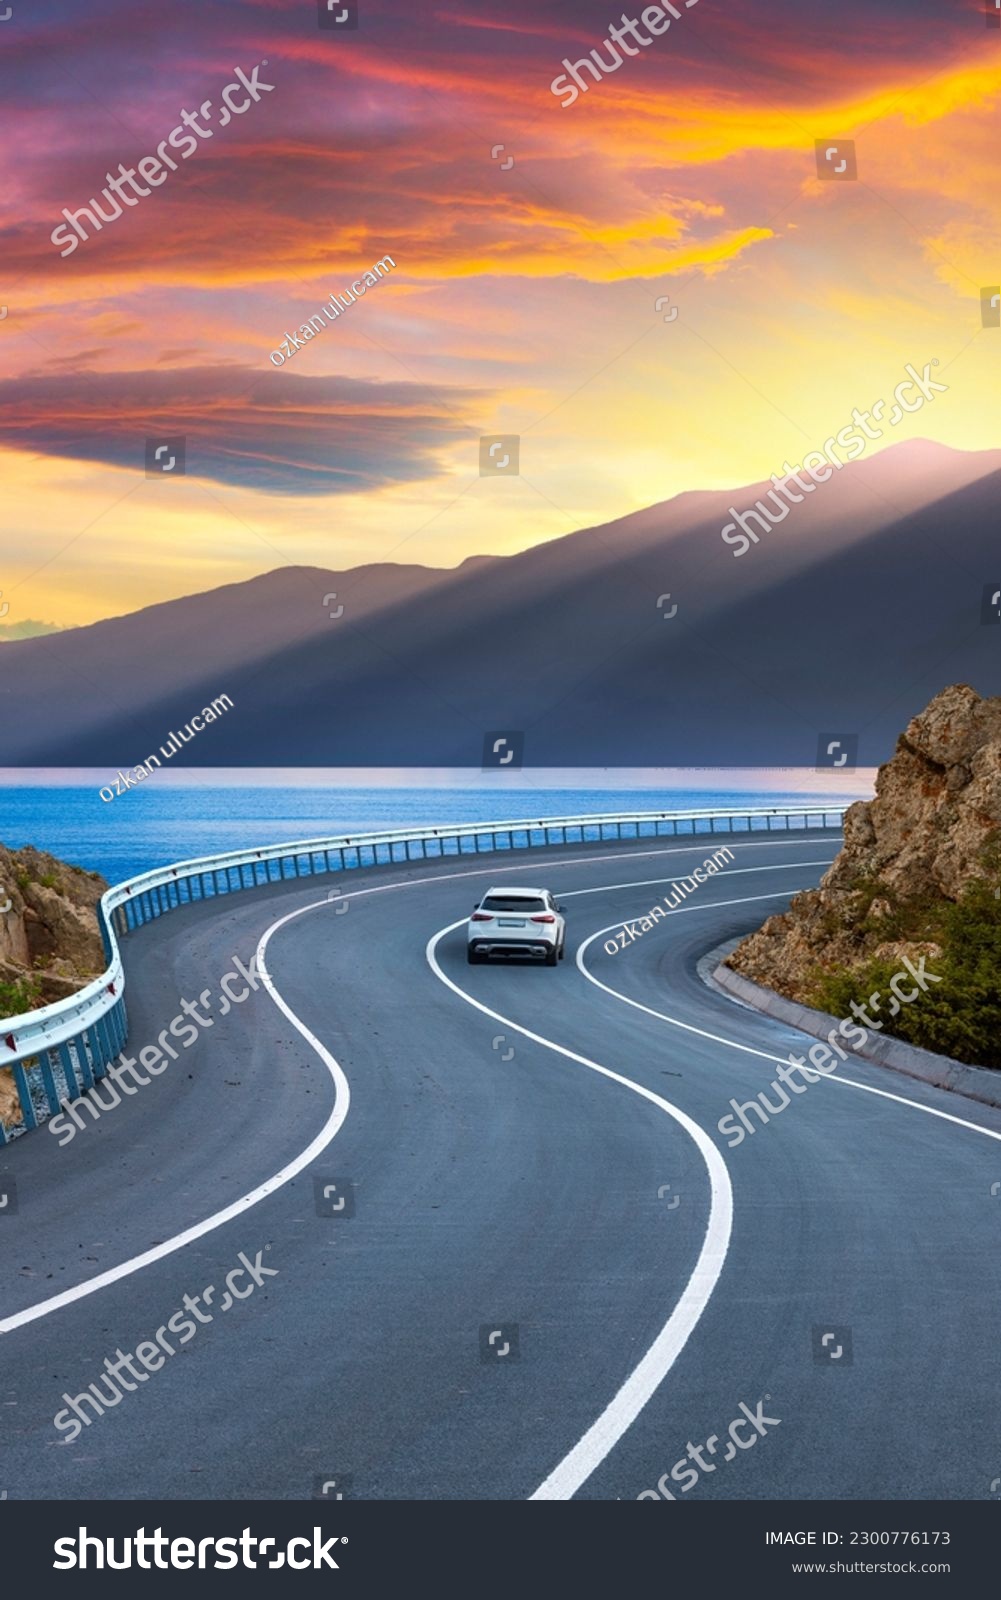 Car in motion in the highway landscape under the coastal road. Road landscape at colorful sunset. Car driving on the highway. Nature scenery on sea beach. Travel journey for summer trip on road. #2300776173